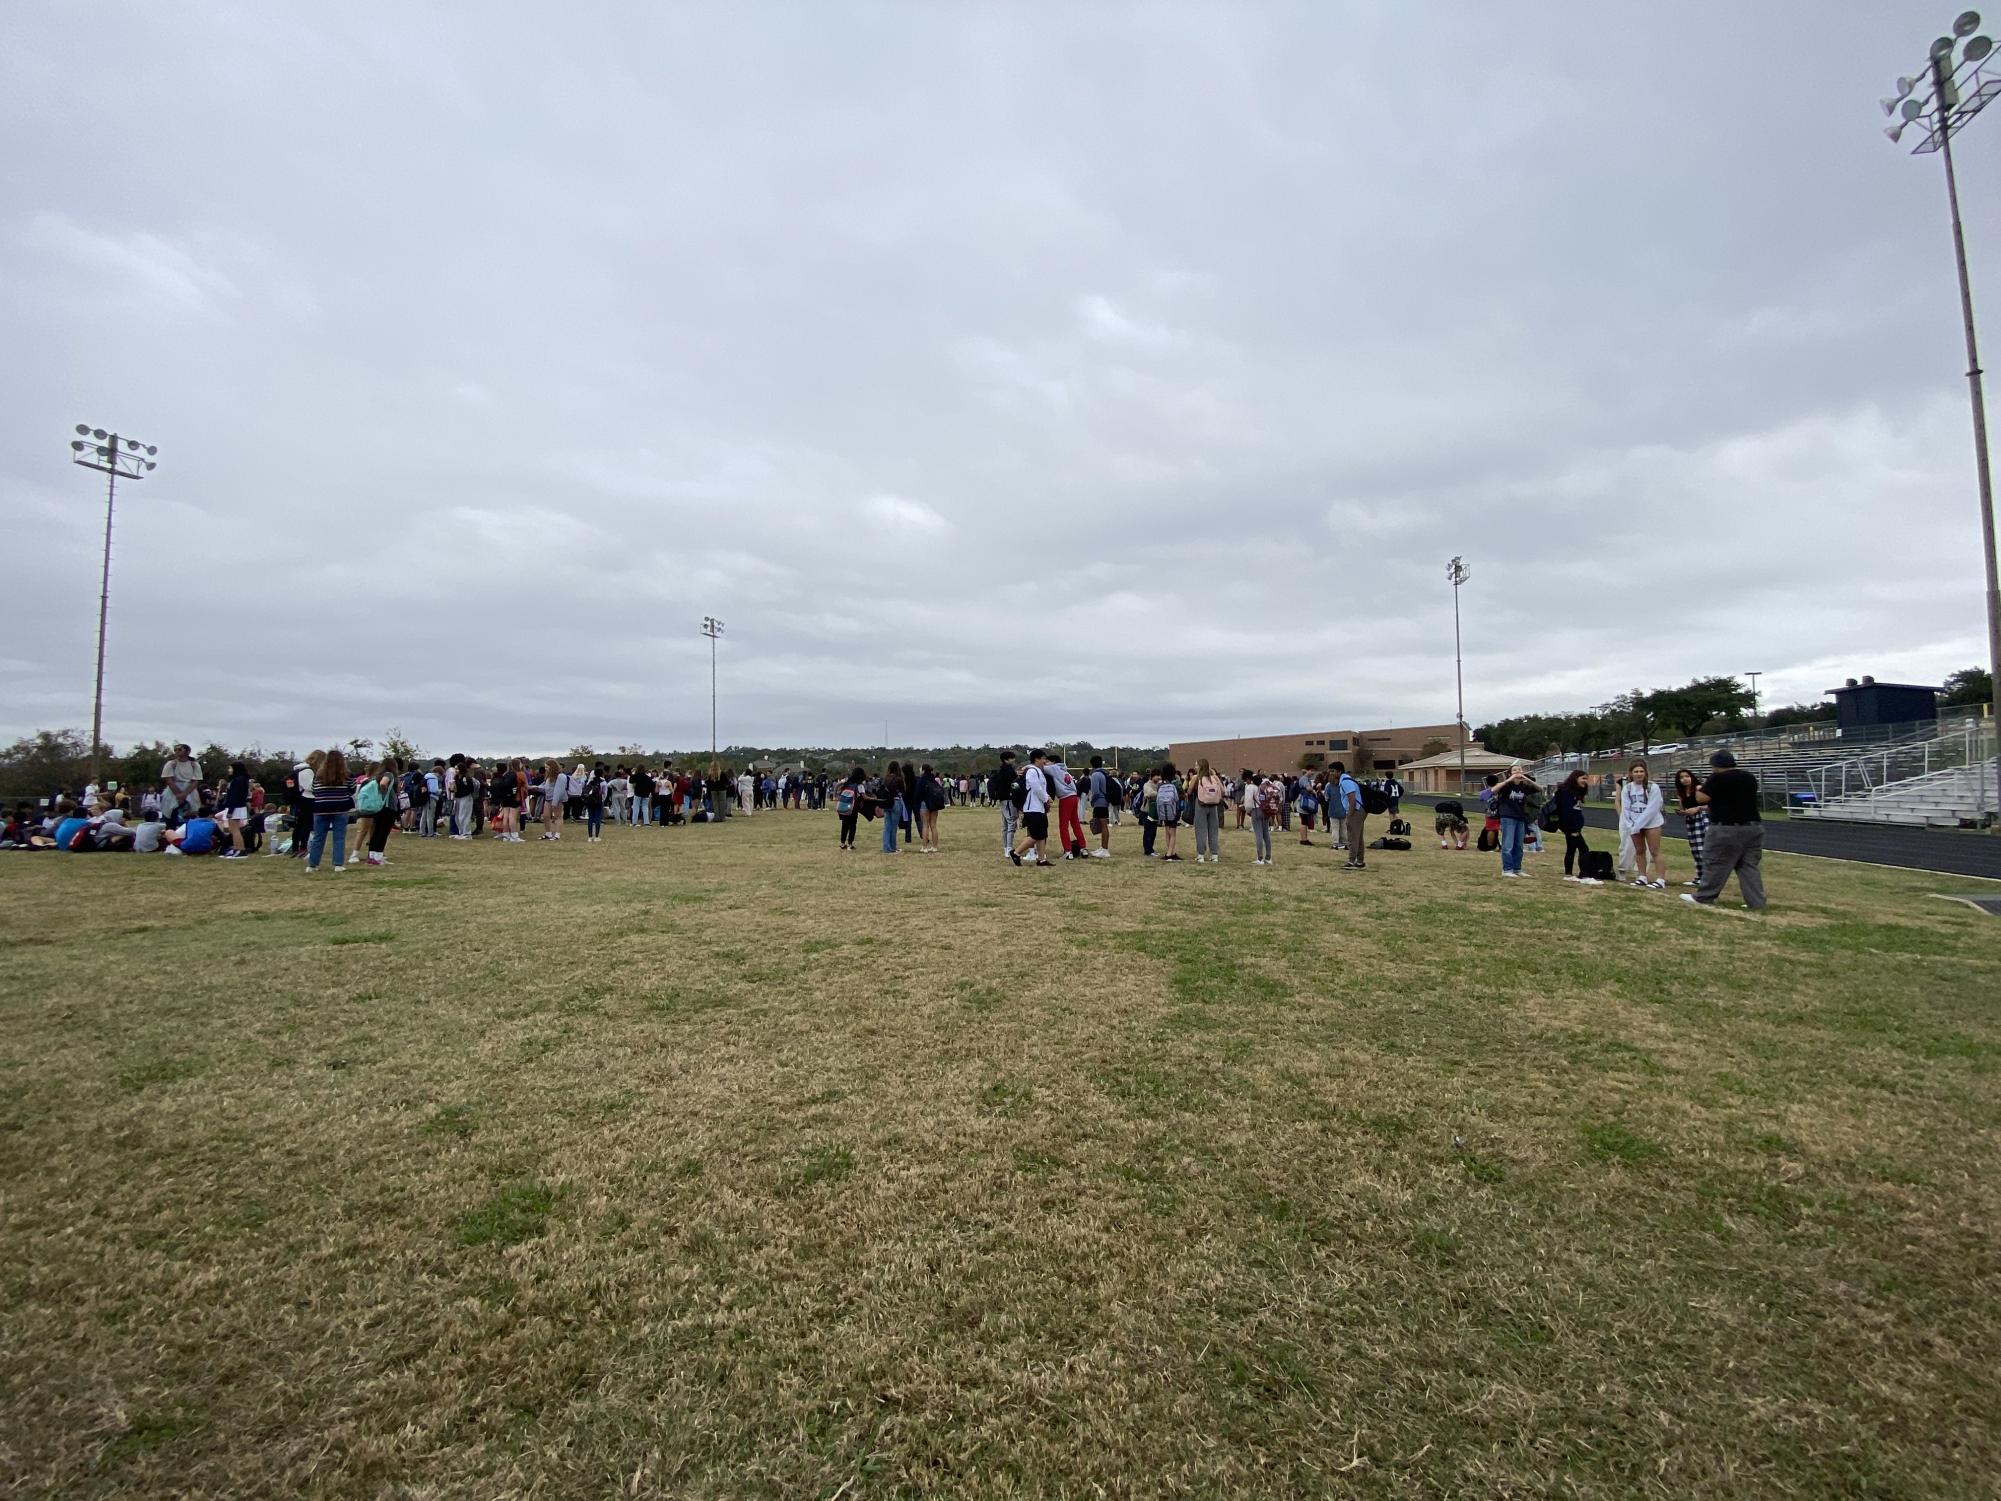 Canyon Vista staff and students gather on the field during the second fire alarm.